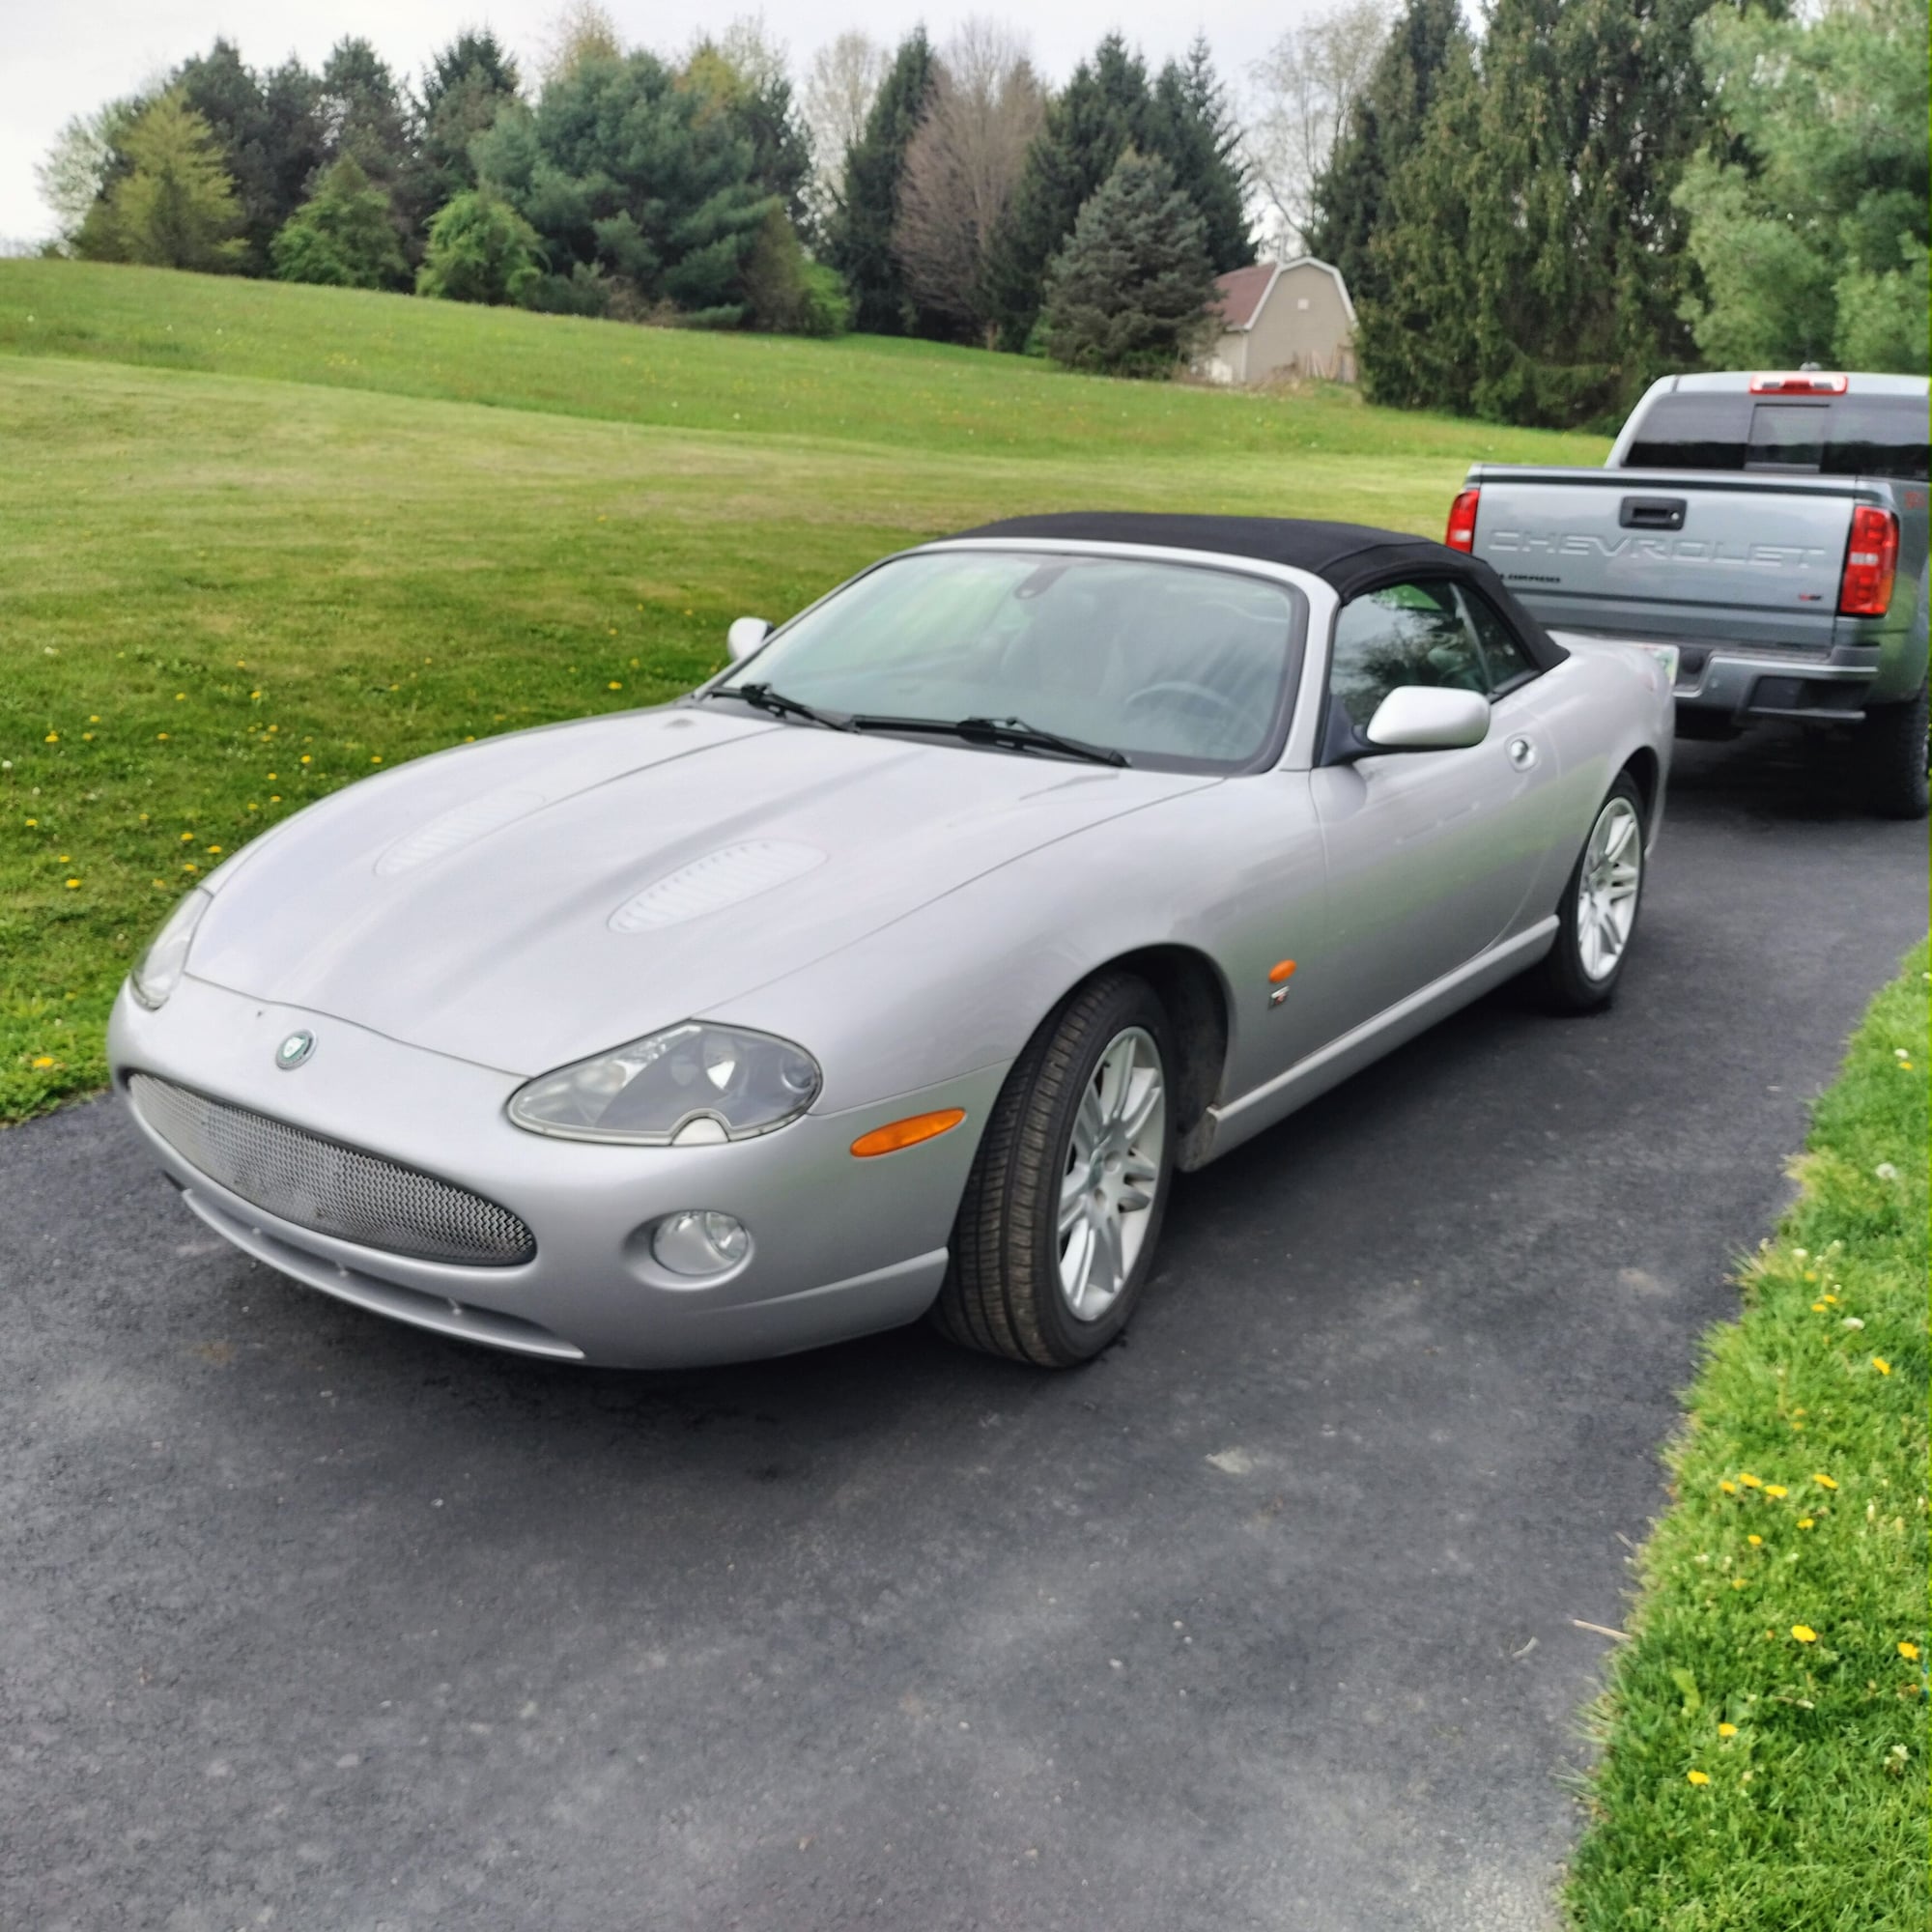 2005 Jaguar XKR - Well maintained 2005 XKR - Used - VIN SAJDA42B353A43004 - 92,500 Miles - 8 cyl - 2WD - Automatic - Convertible - Silver - Cleveland Area, OH 44266, United States